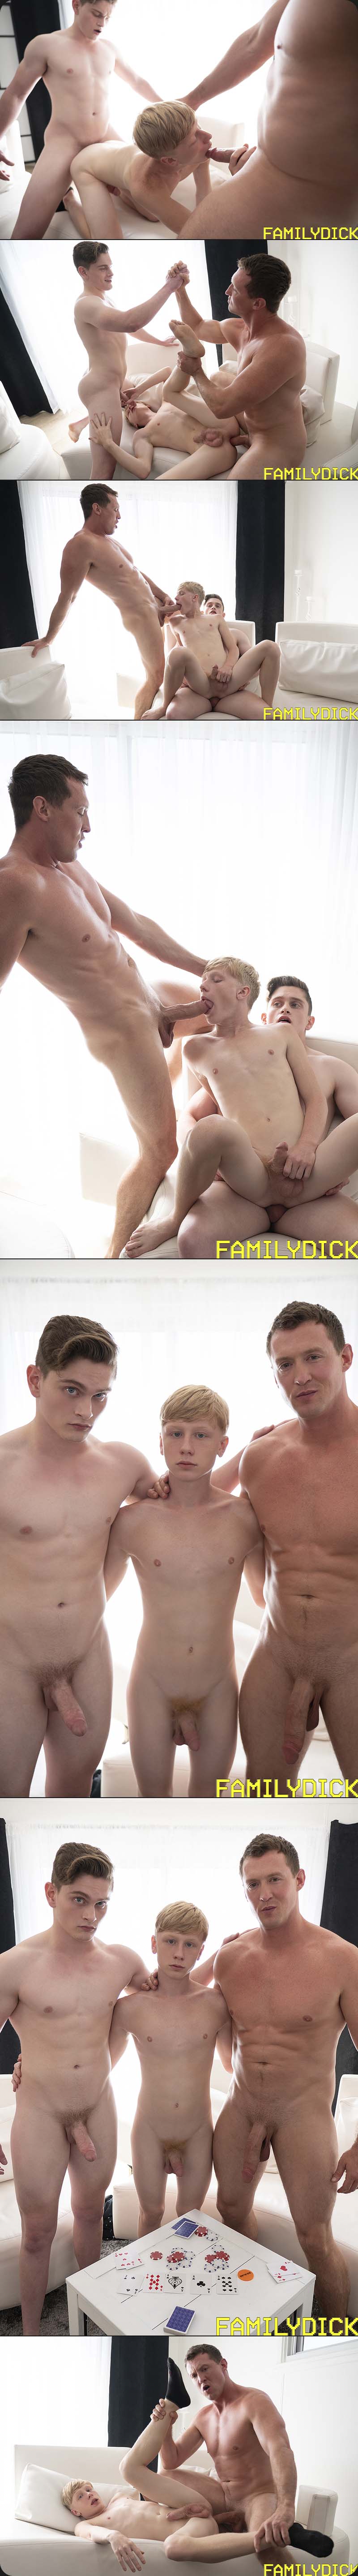 Cool Dad, CALL MY BLUFF (Pierce Paris, Jay Tee and Caleb Anthony) at FamilyDick